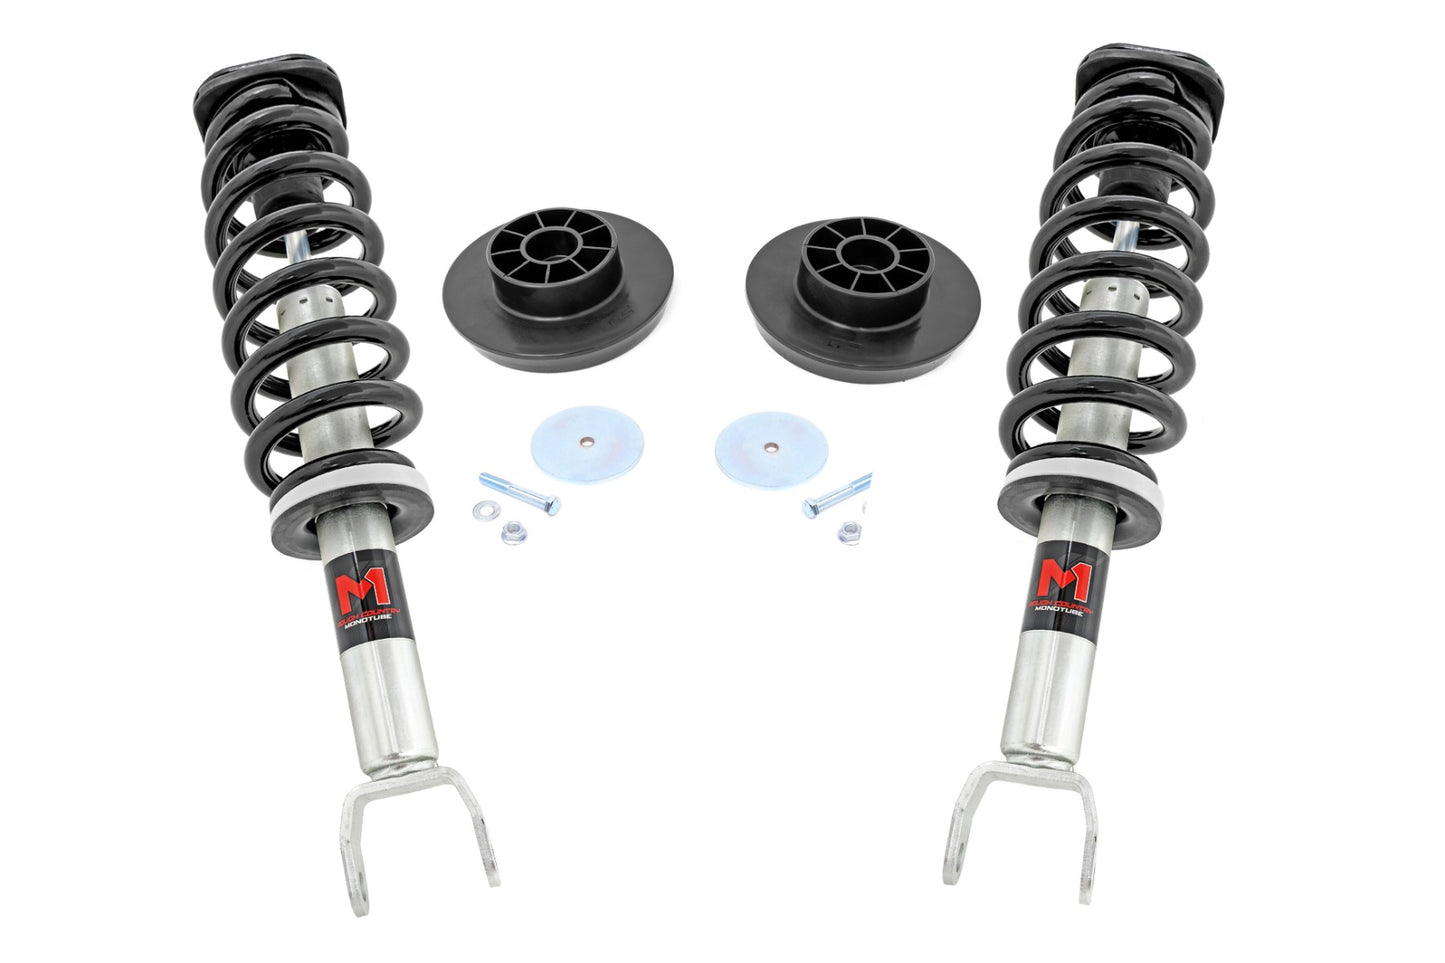 Rough Country (35840) 2 Inch Lift Kit |M1 Struts | Ram 1500 4WD (2012-2018 & Classic)